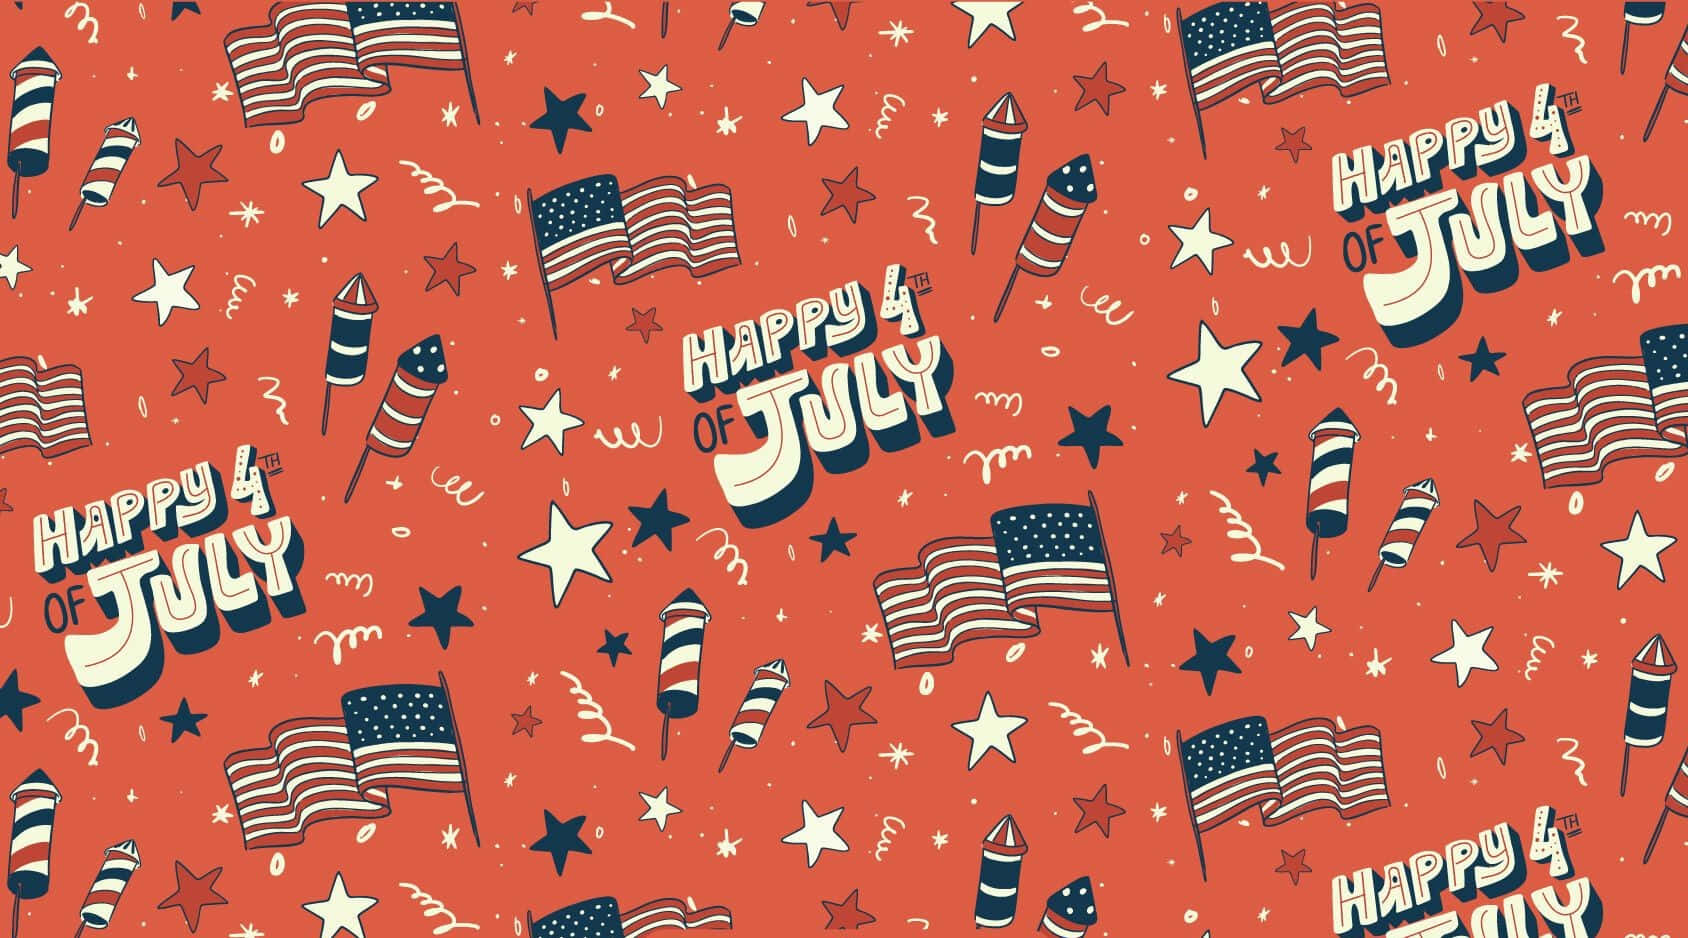 Celebrate Independence Day with a cute 4th of July backdrop!